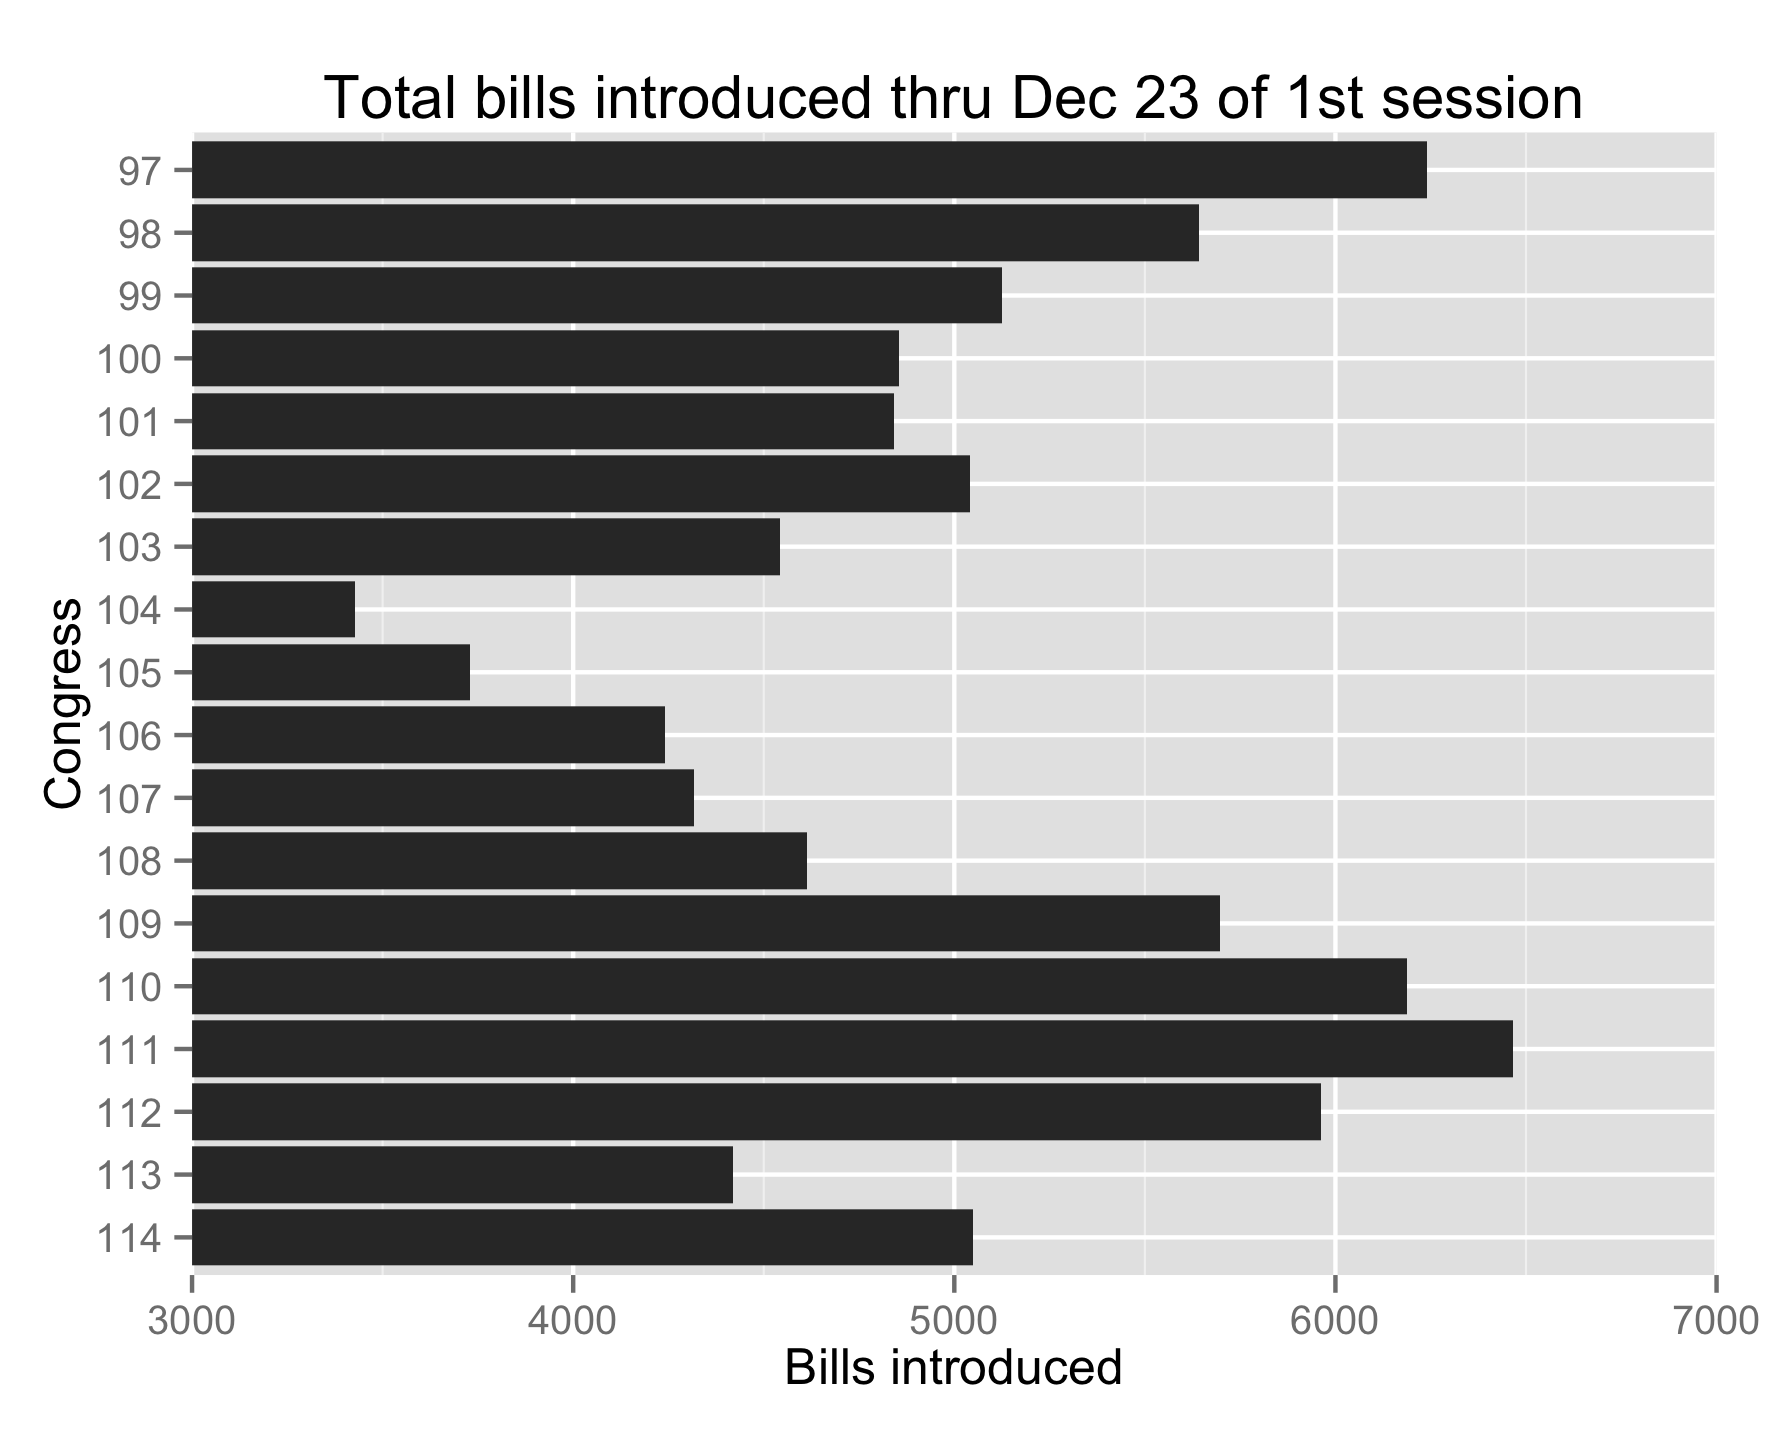 Total bills introduced in the House through December 31 of the first session of each congress